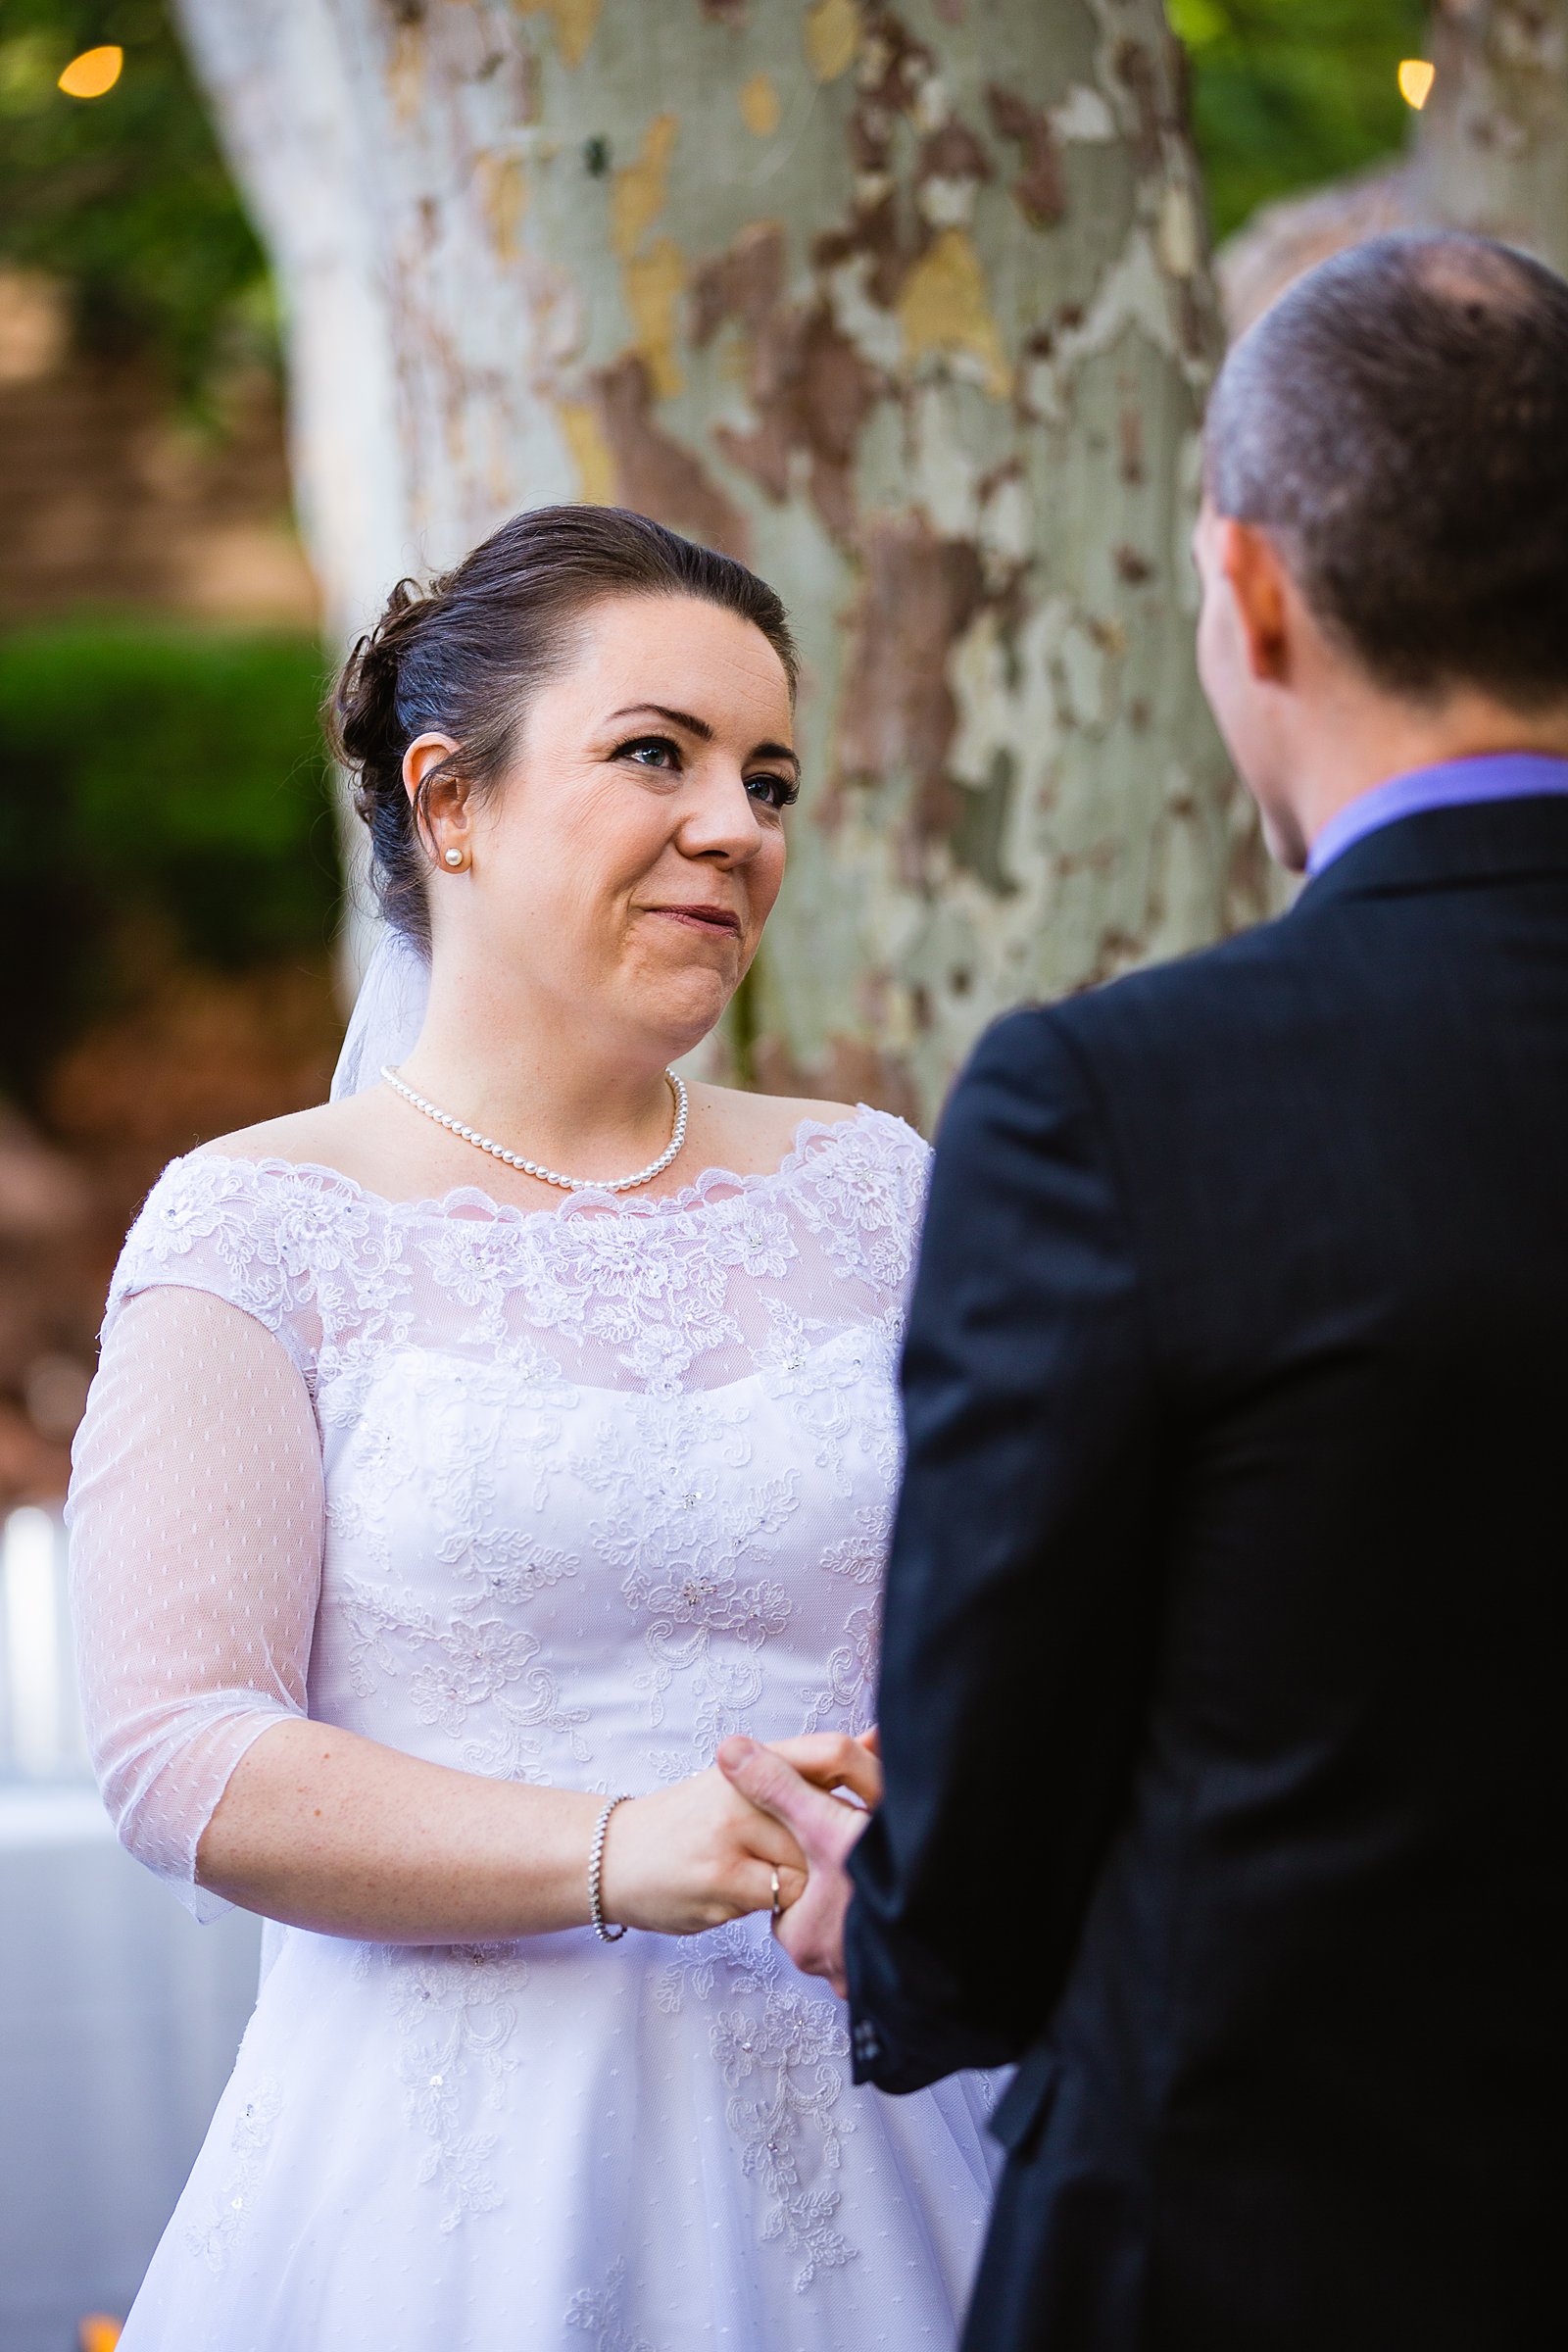 Bride looking at her groom during their wedding ceremony at L'Auberge de Sedona by Sedona wedding photographer PMA Photography.